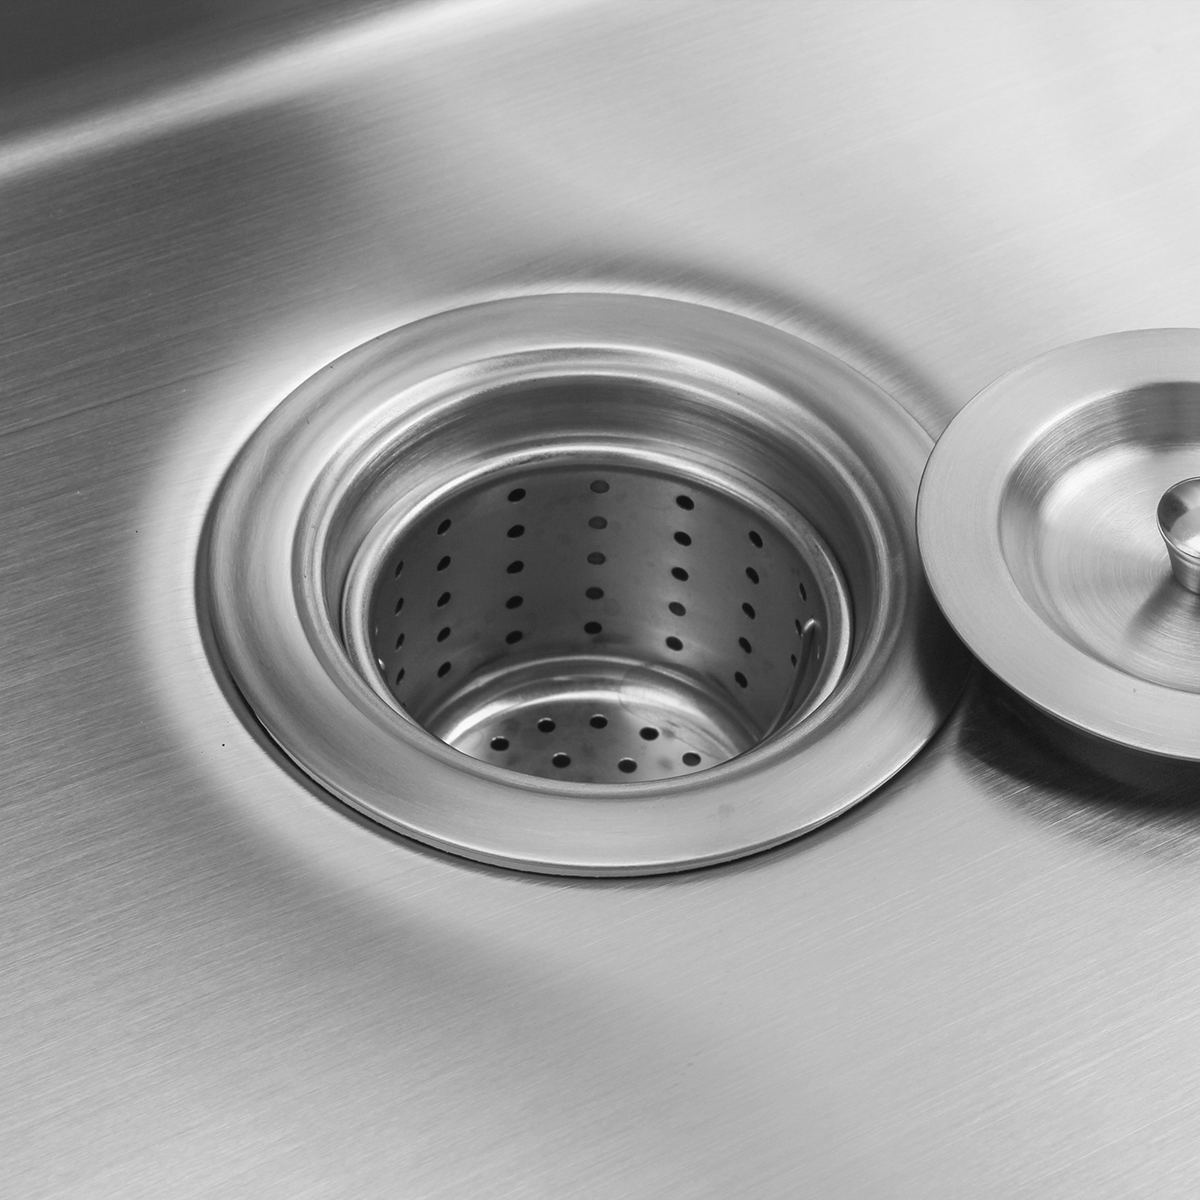 Stainless Steel PVD NANO Kitchen Sink with Drain Board Bottom Grid Drain Assembly